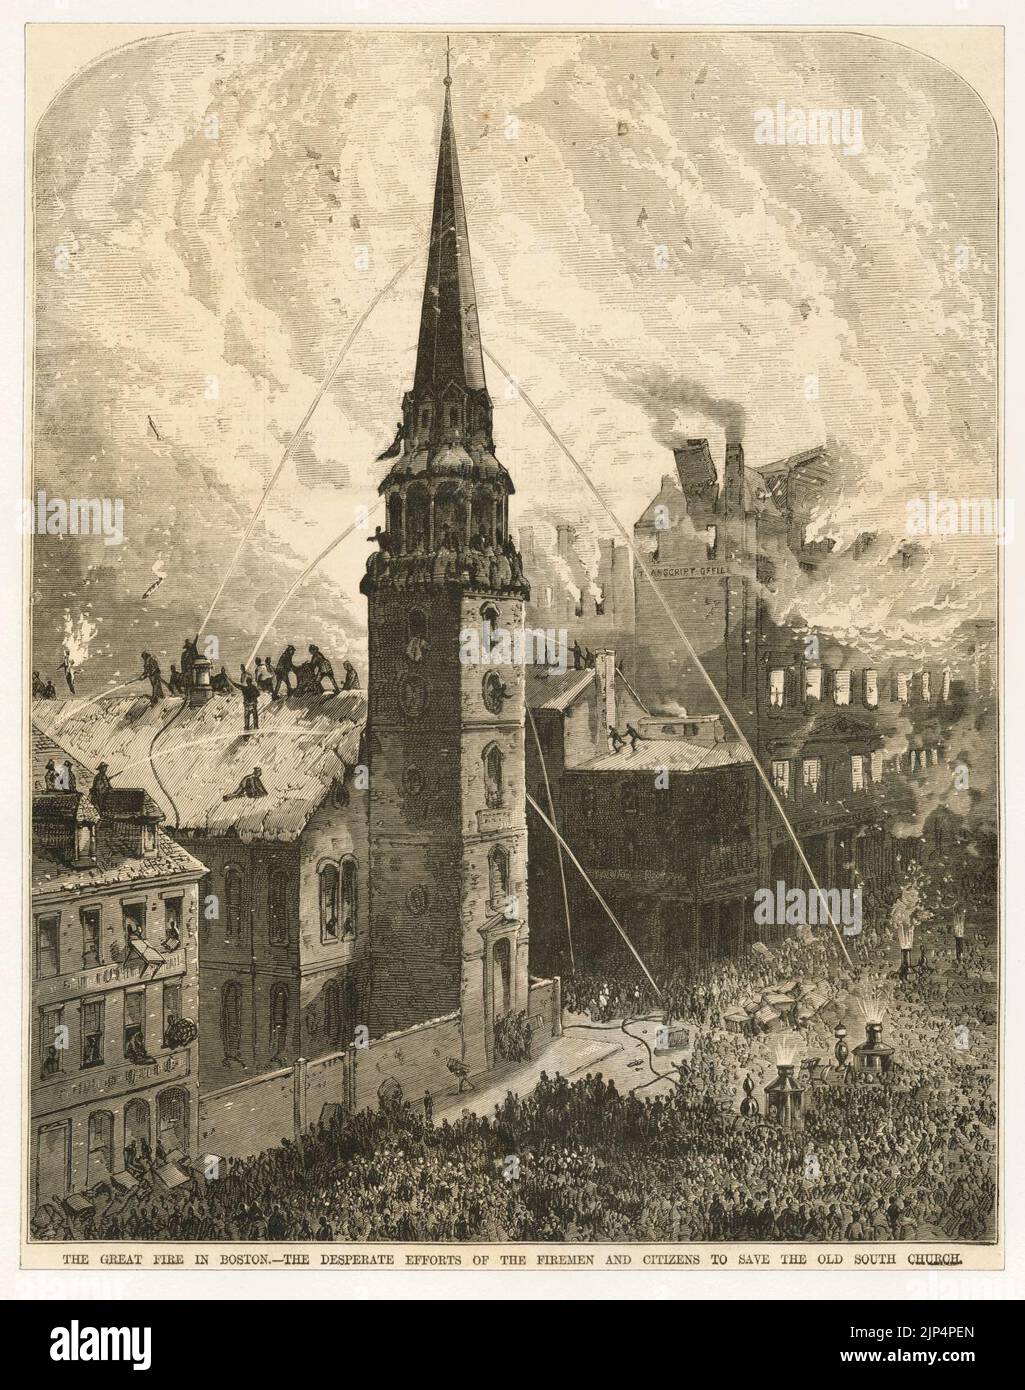 The great fire in Boston - the desperate attempts of the firemen and citizens to save the Old South Church Stock Photo